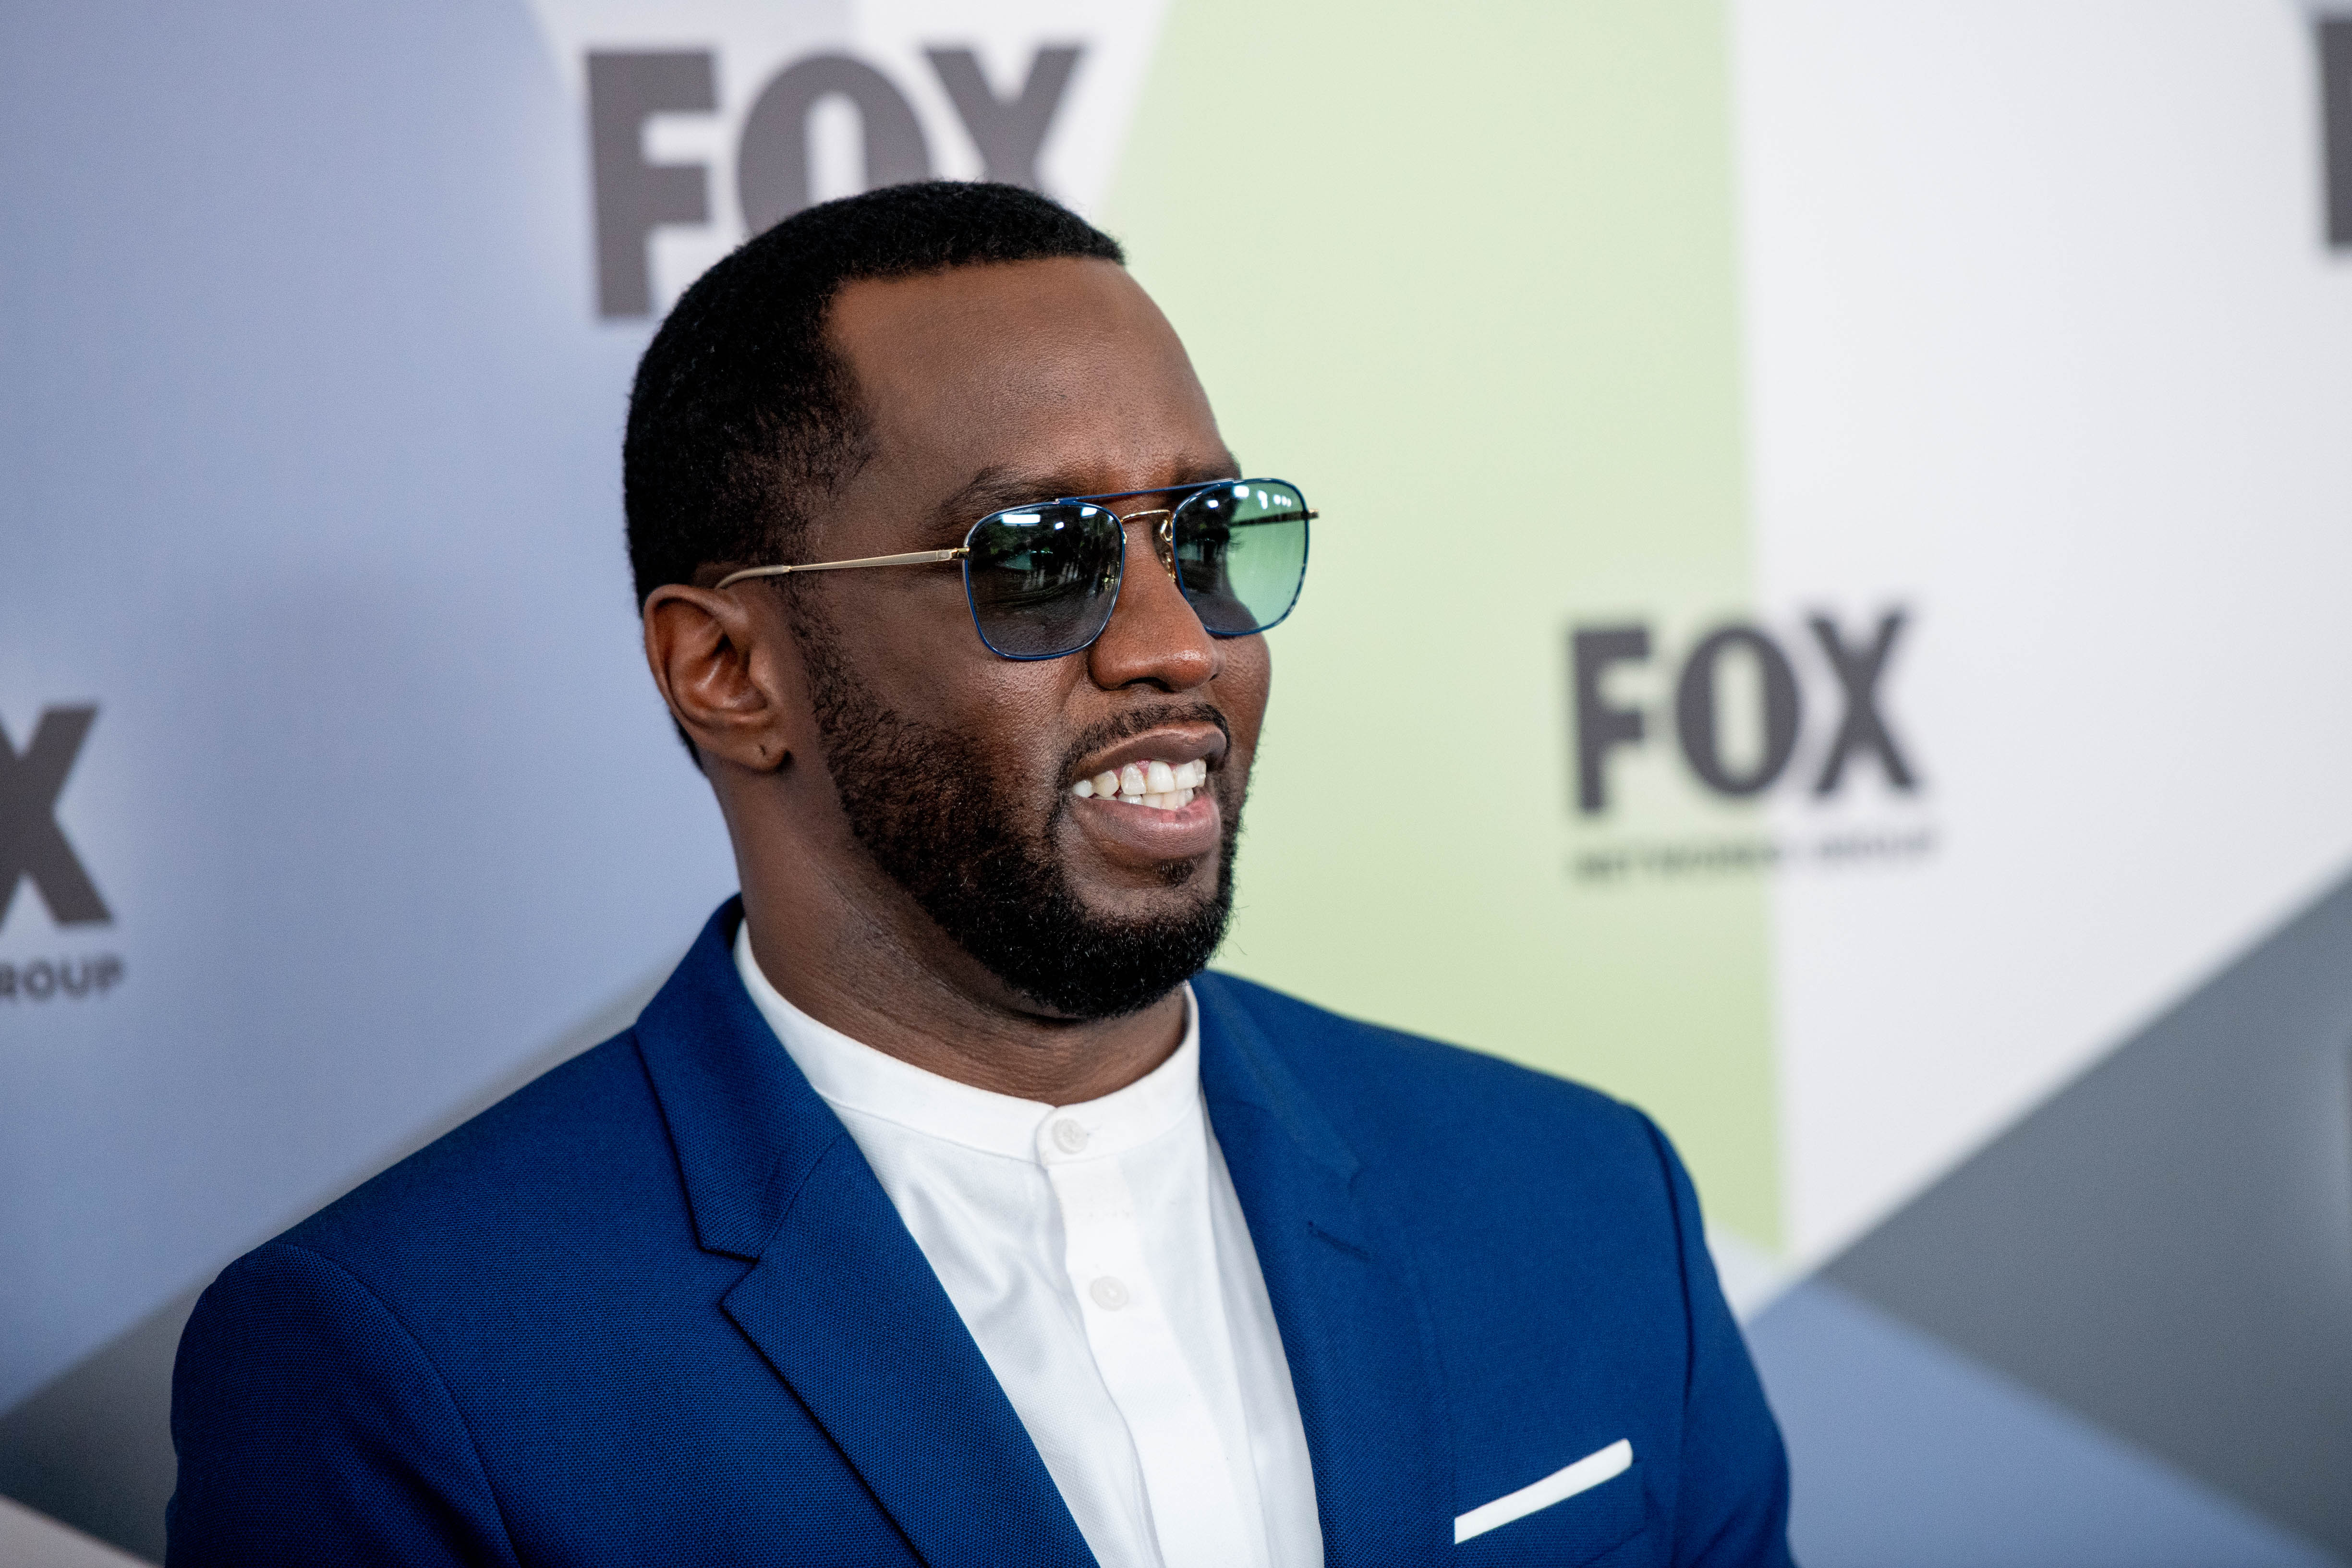 Sean 'Diddy' Combs attend the 2018 Fox Network Upfront at Wollman Rink, Central Park on May 14, 2018 in New York City. | Photo: Getty Images